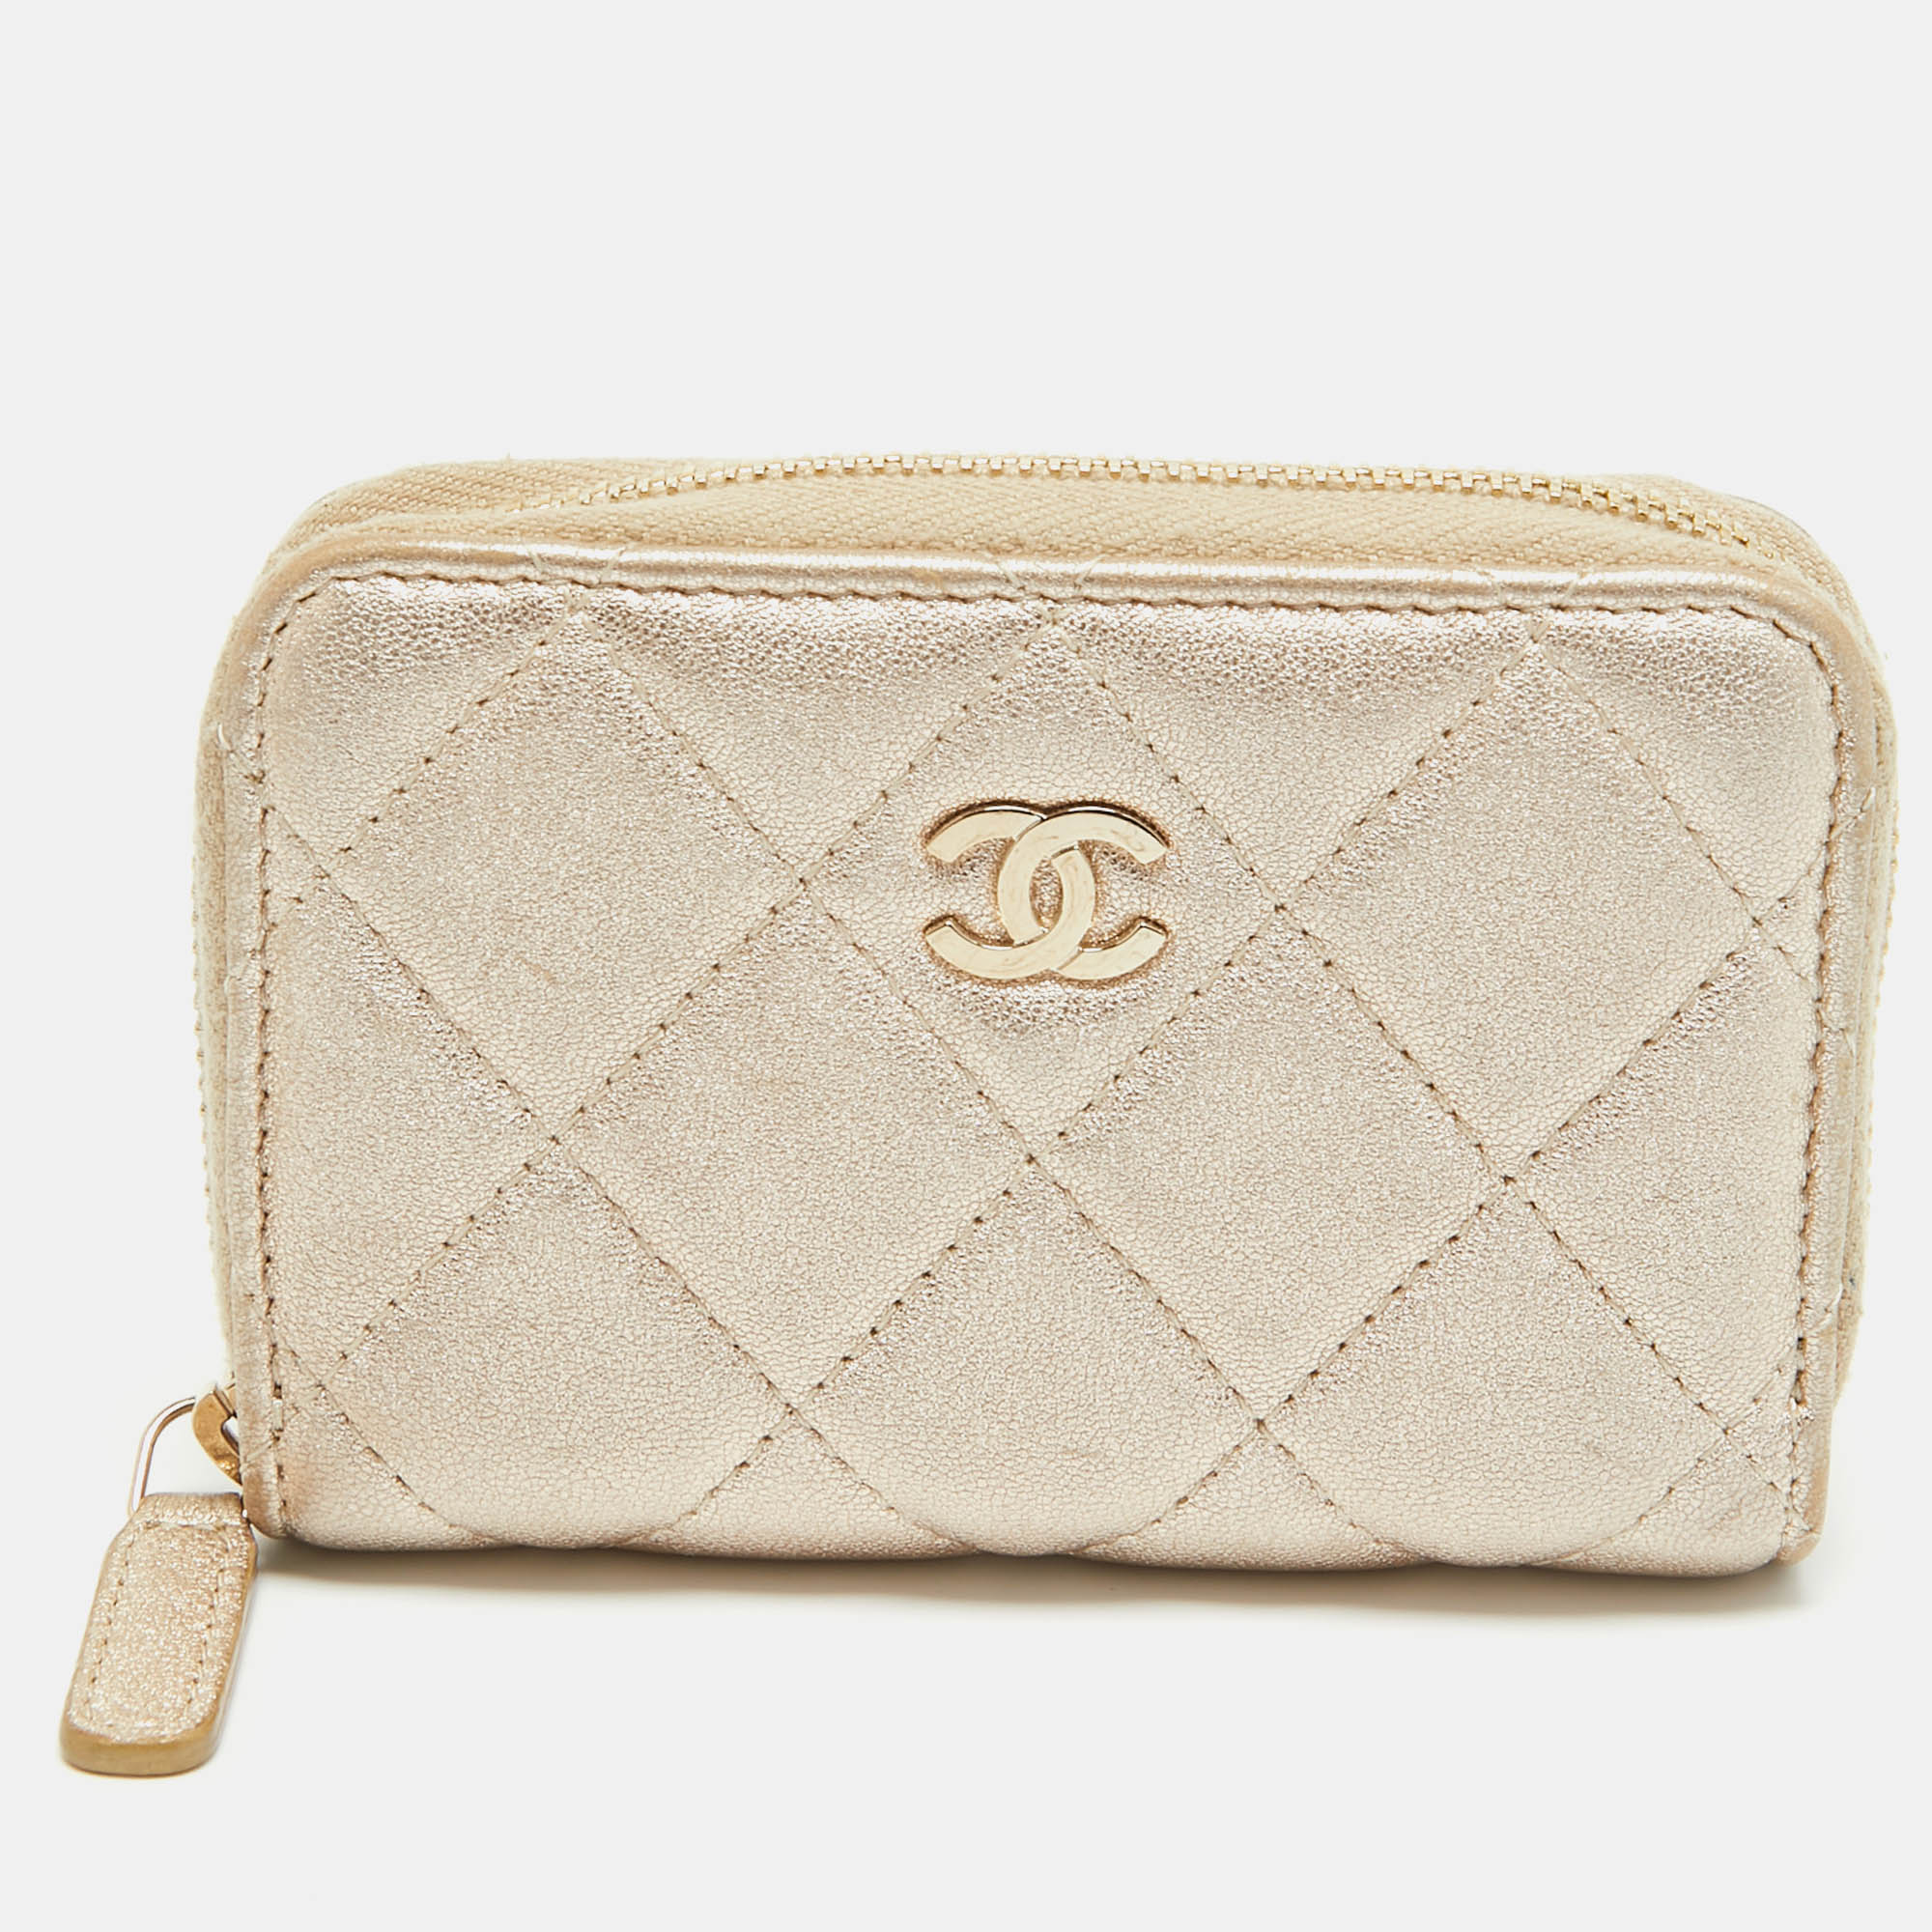 Chanel gold quilted leather zip around coin purse